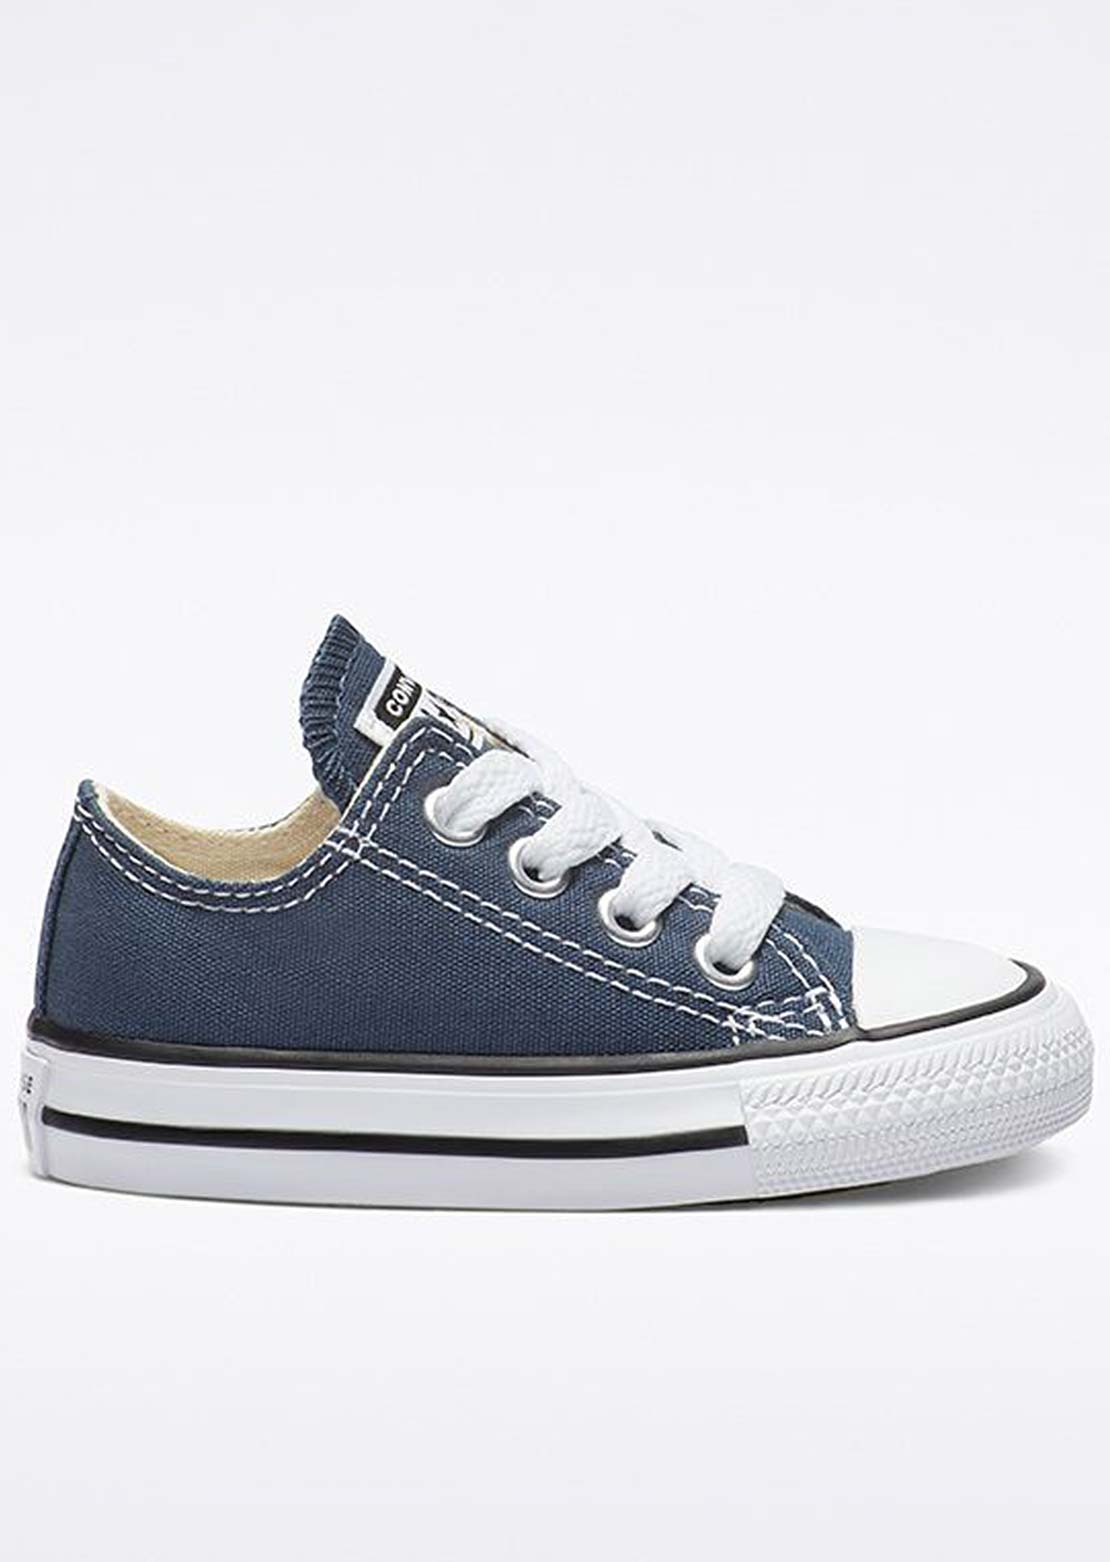 Converse Infant Chuck Taylor All Star Low-Top Shoes Navy